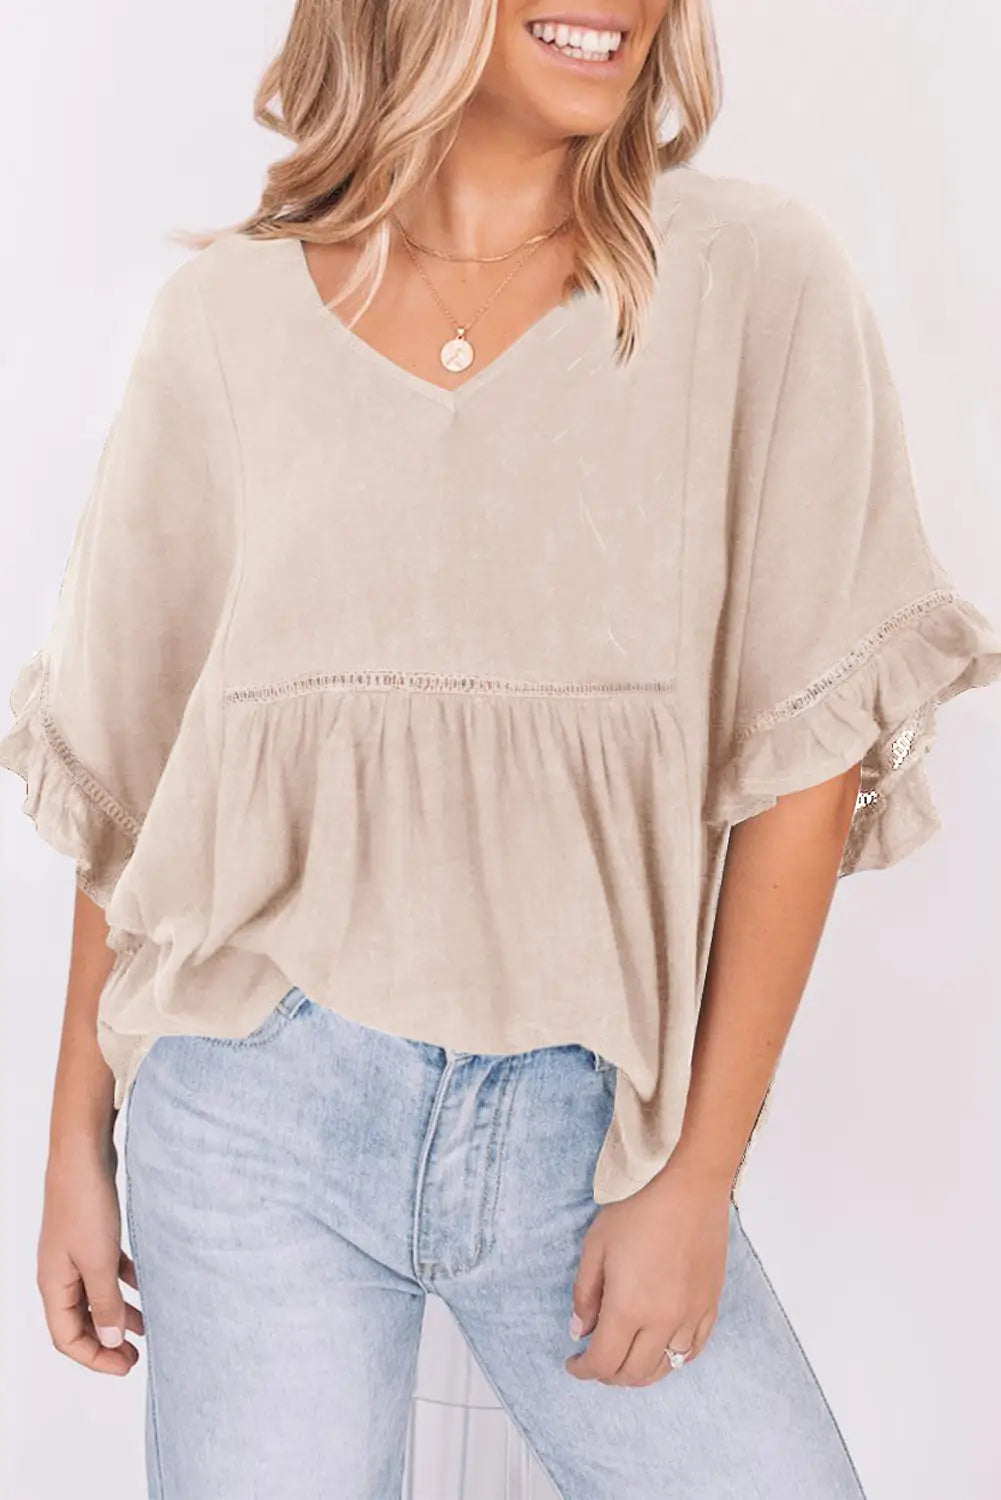 Apricot ruffled lace detail loose v neck top - s /